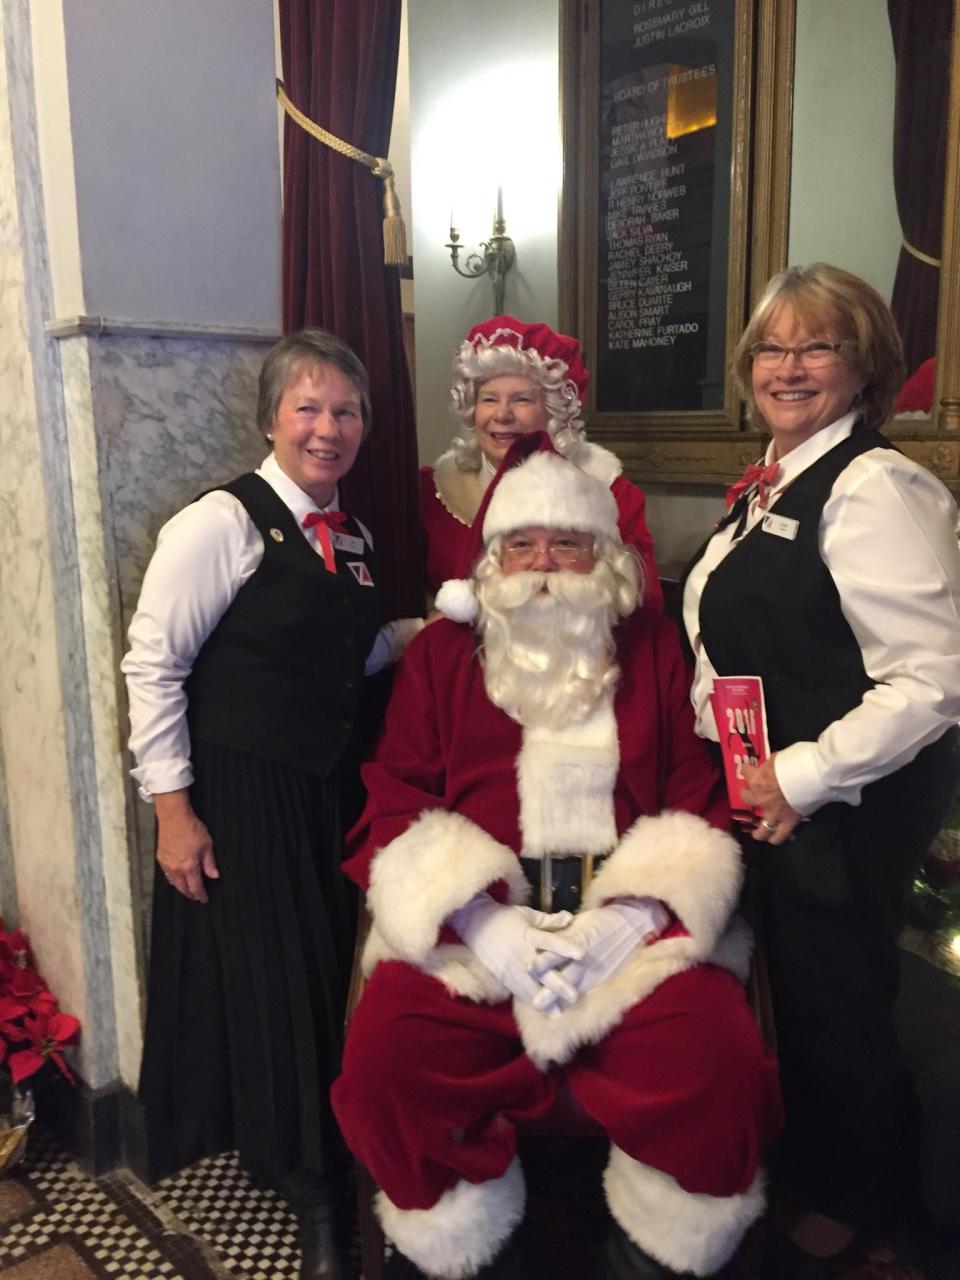 As Santa Claus, Cliff Roderiques and Judy Roderiques, as Mrs. Claus, pose with two other Zeiterion ushers during a matinee performance of "A Christmas Carol."